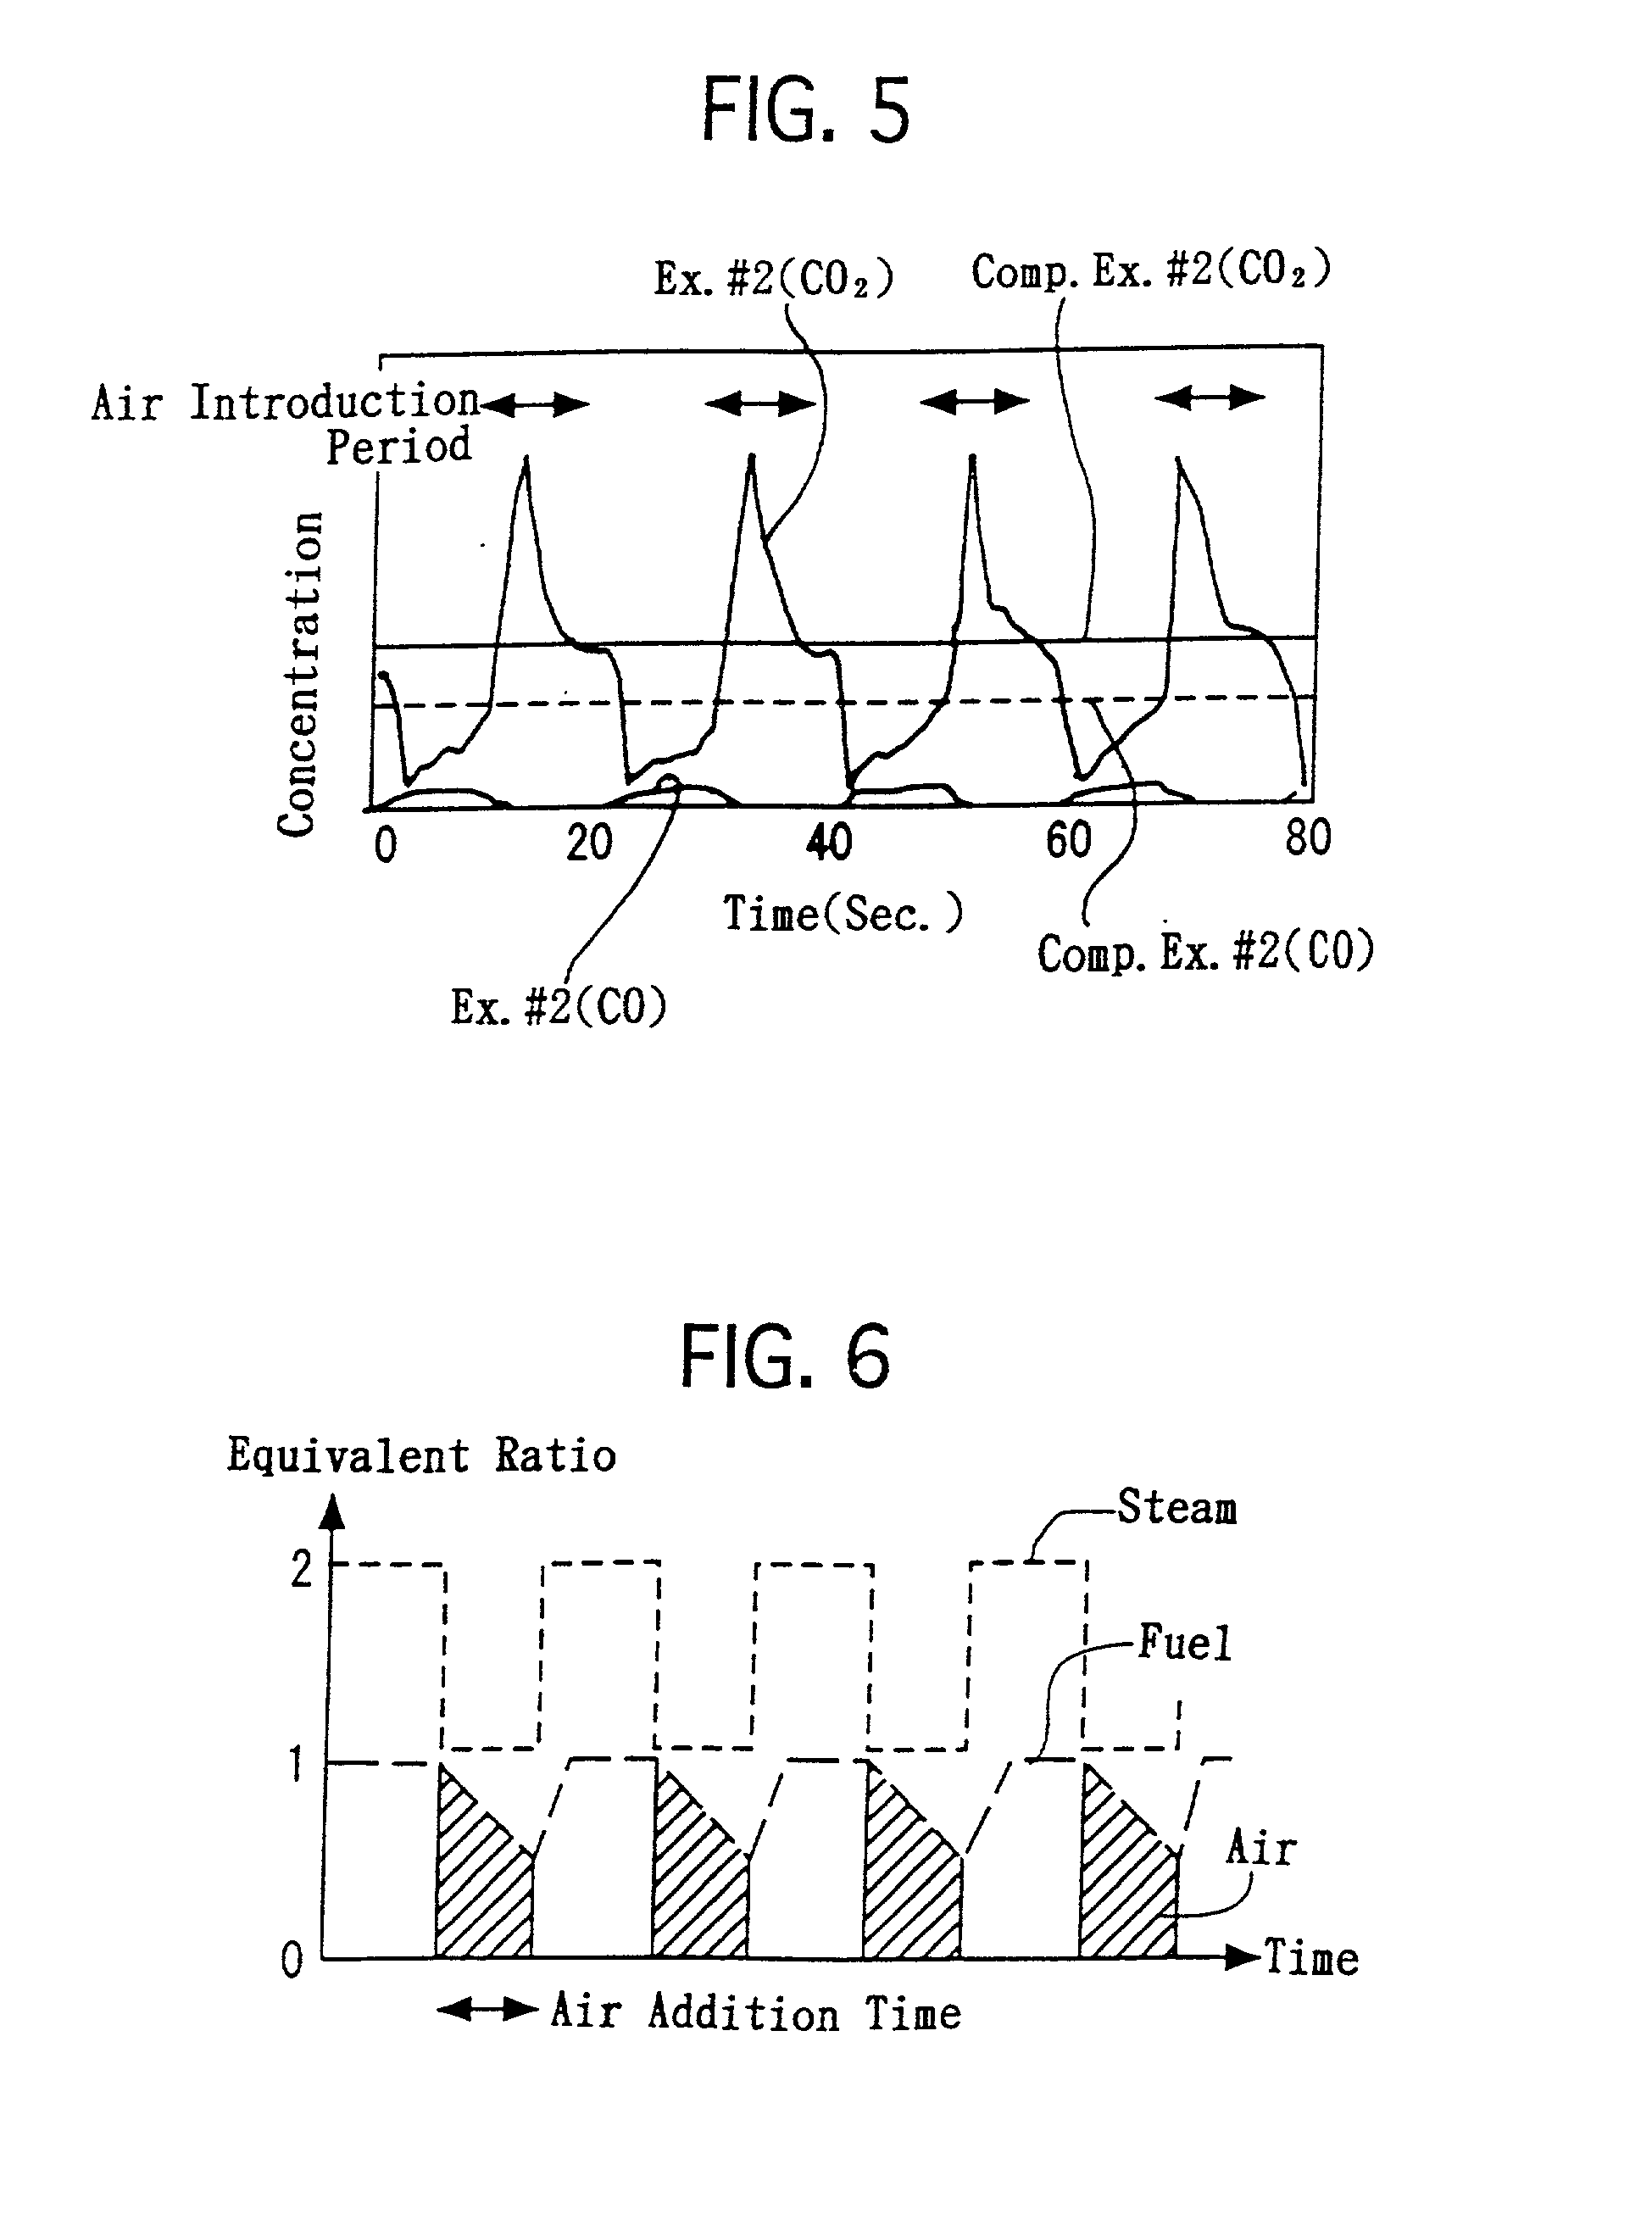 Process for generating hydrogen and apparatus for generating hydrogen